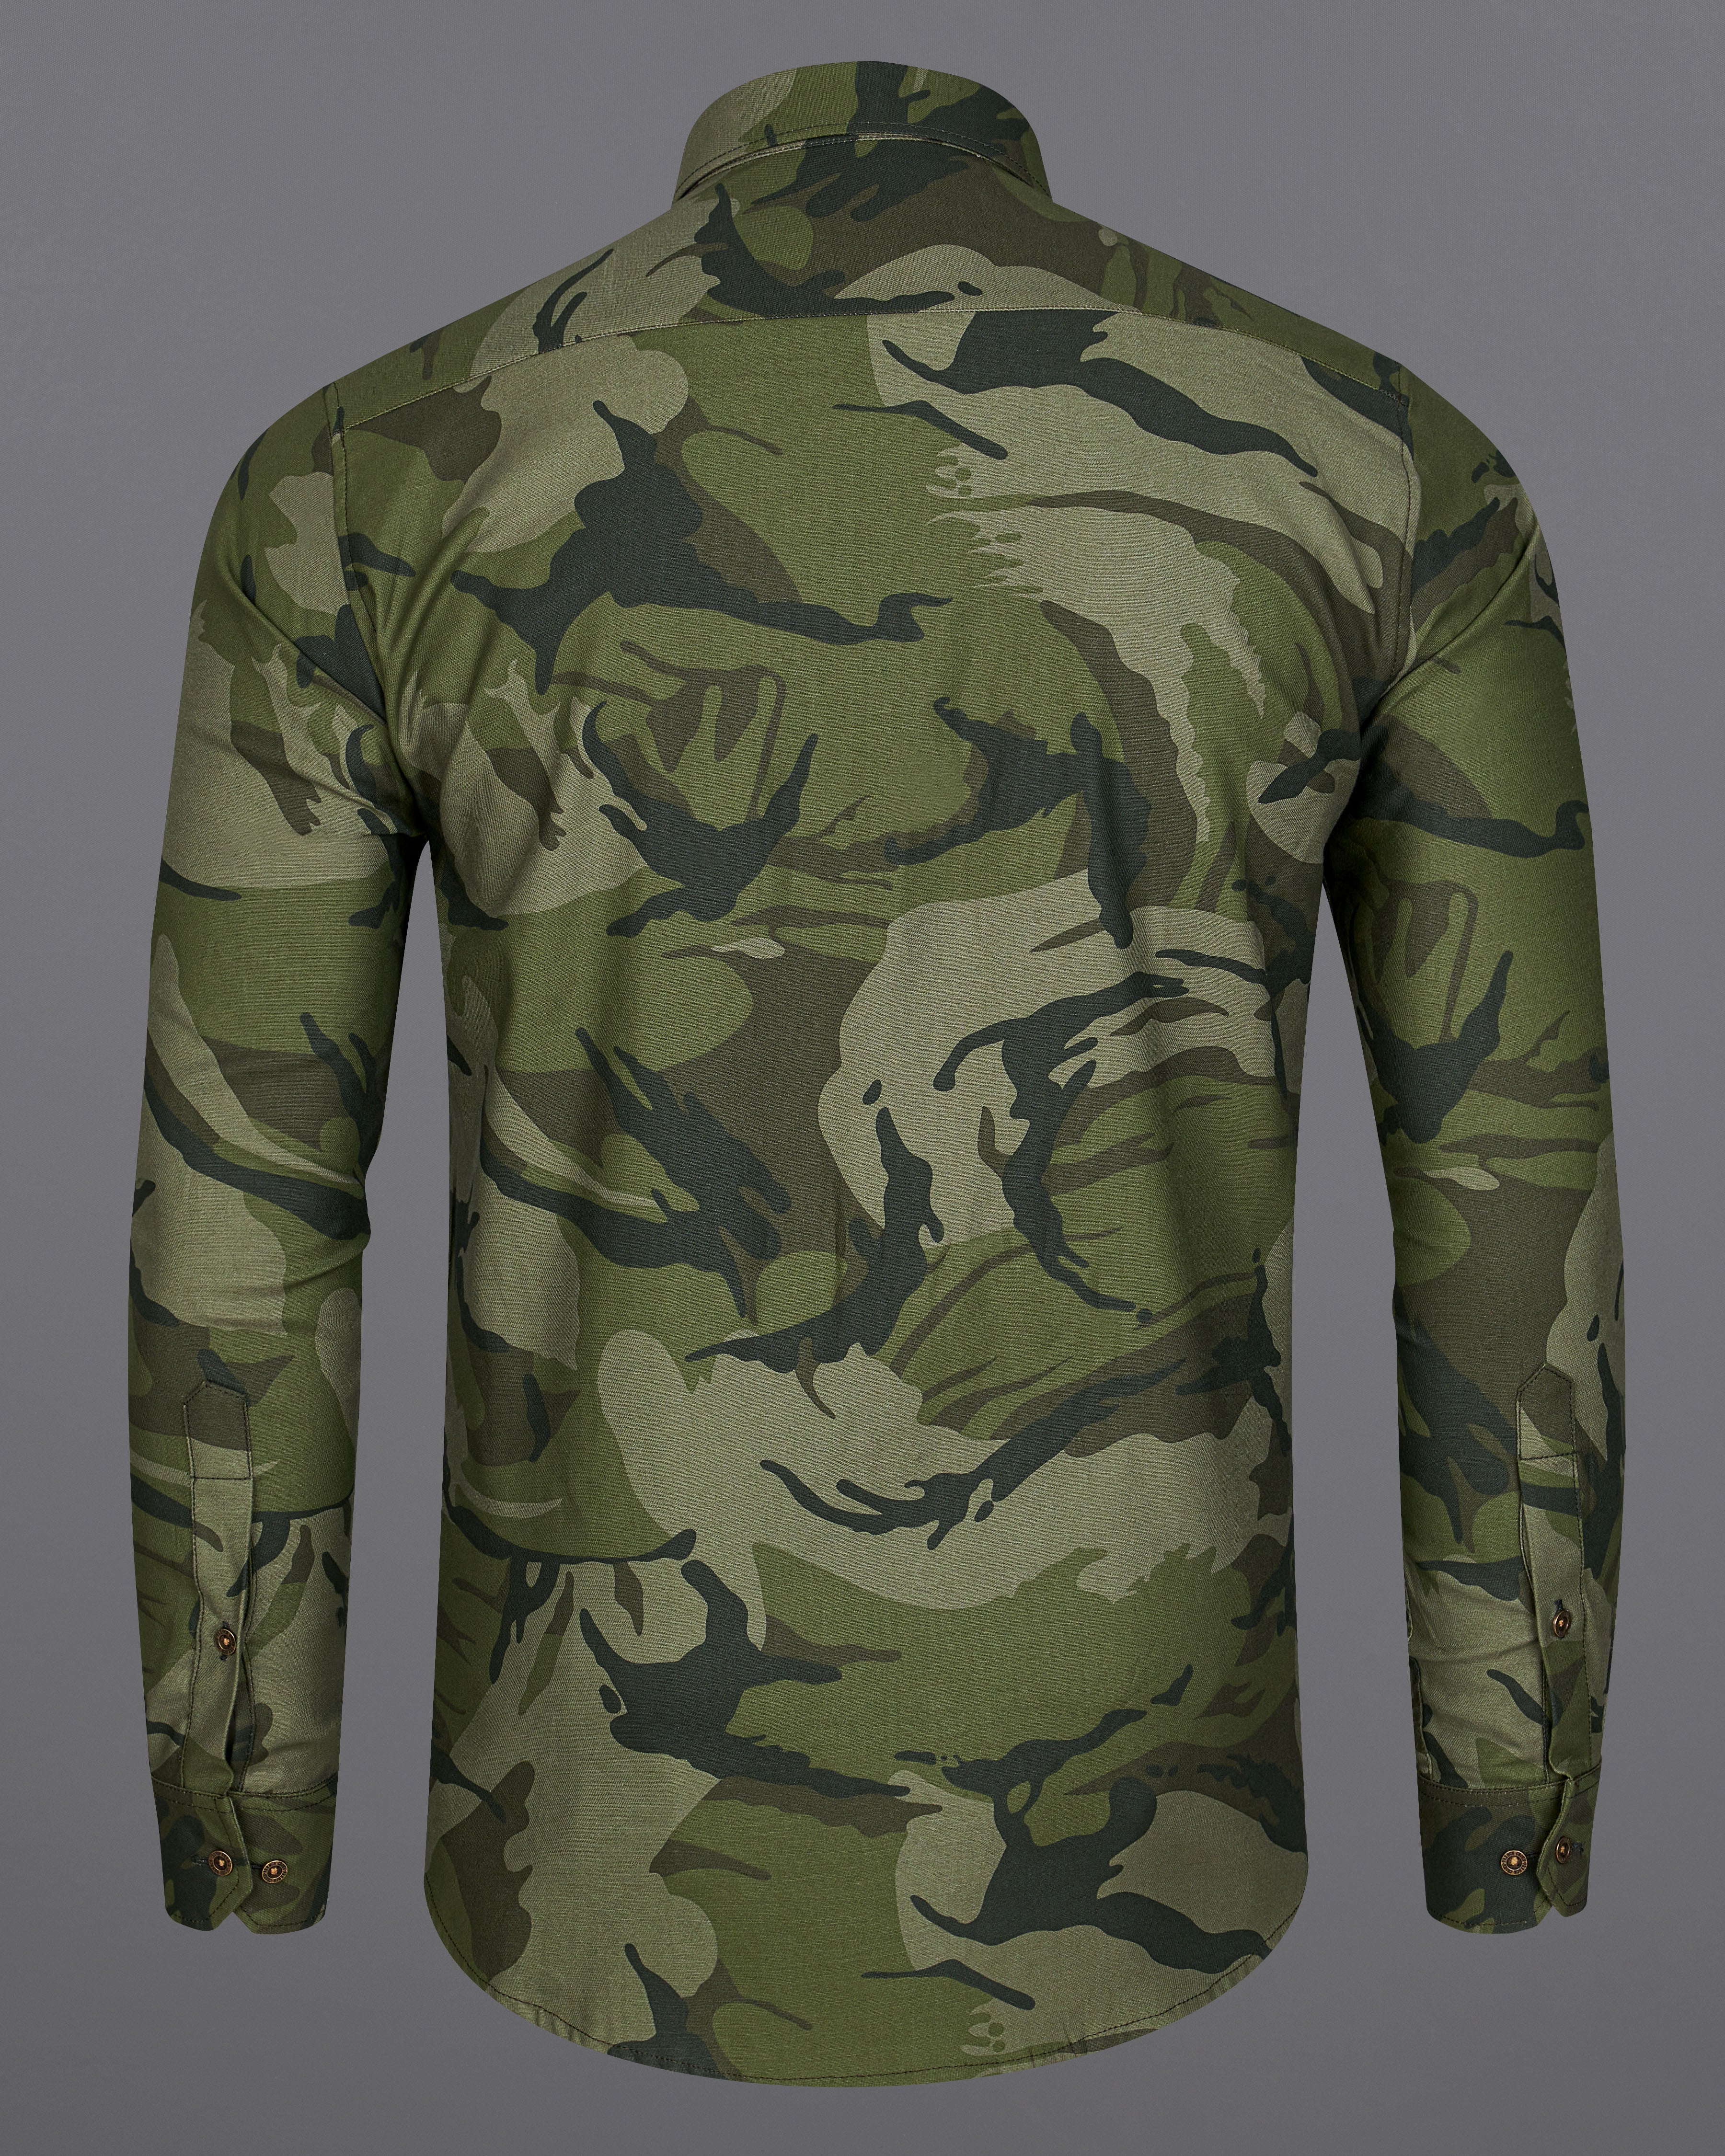 Fuscous Green with Birch Dark Green Camouflage Printed Royal Oxford Shirt 8913-MB-38, 8913-MB-H-38,  8913-MB-39,  8913-MB-H-39,  8913-MB-40,  8913-MB-H-40,  8913-MB-42,  8913-MB-H-42,  8913-MB-44,  8913-MB-H-44,  8913-MB-46,  8913-MB-H-46,  8913-MB-48,  8913-MB-H-48,  8913-MB-50,  8913-MB-H-50,  8913-MB-52,  8913-MB-H-52